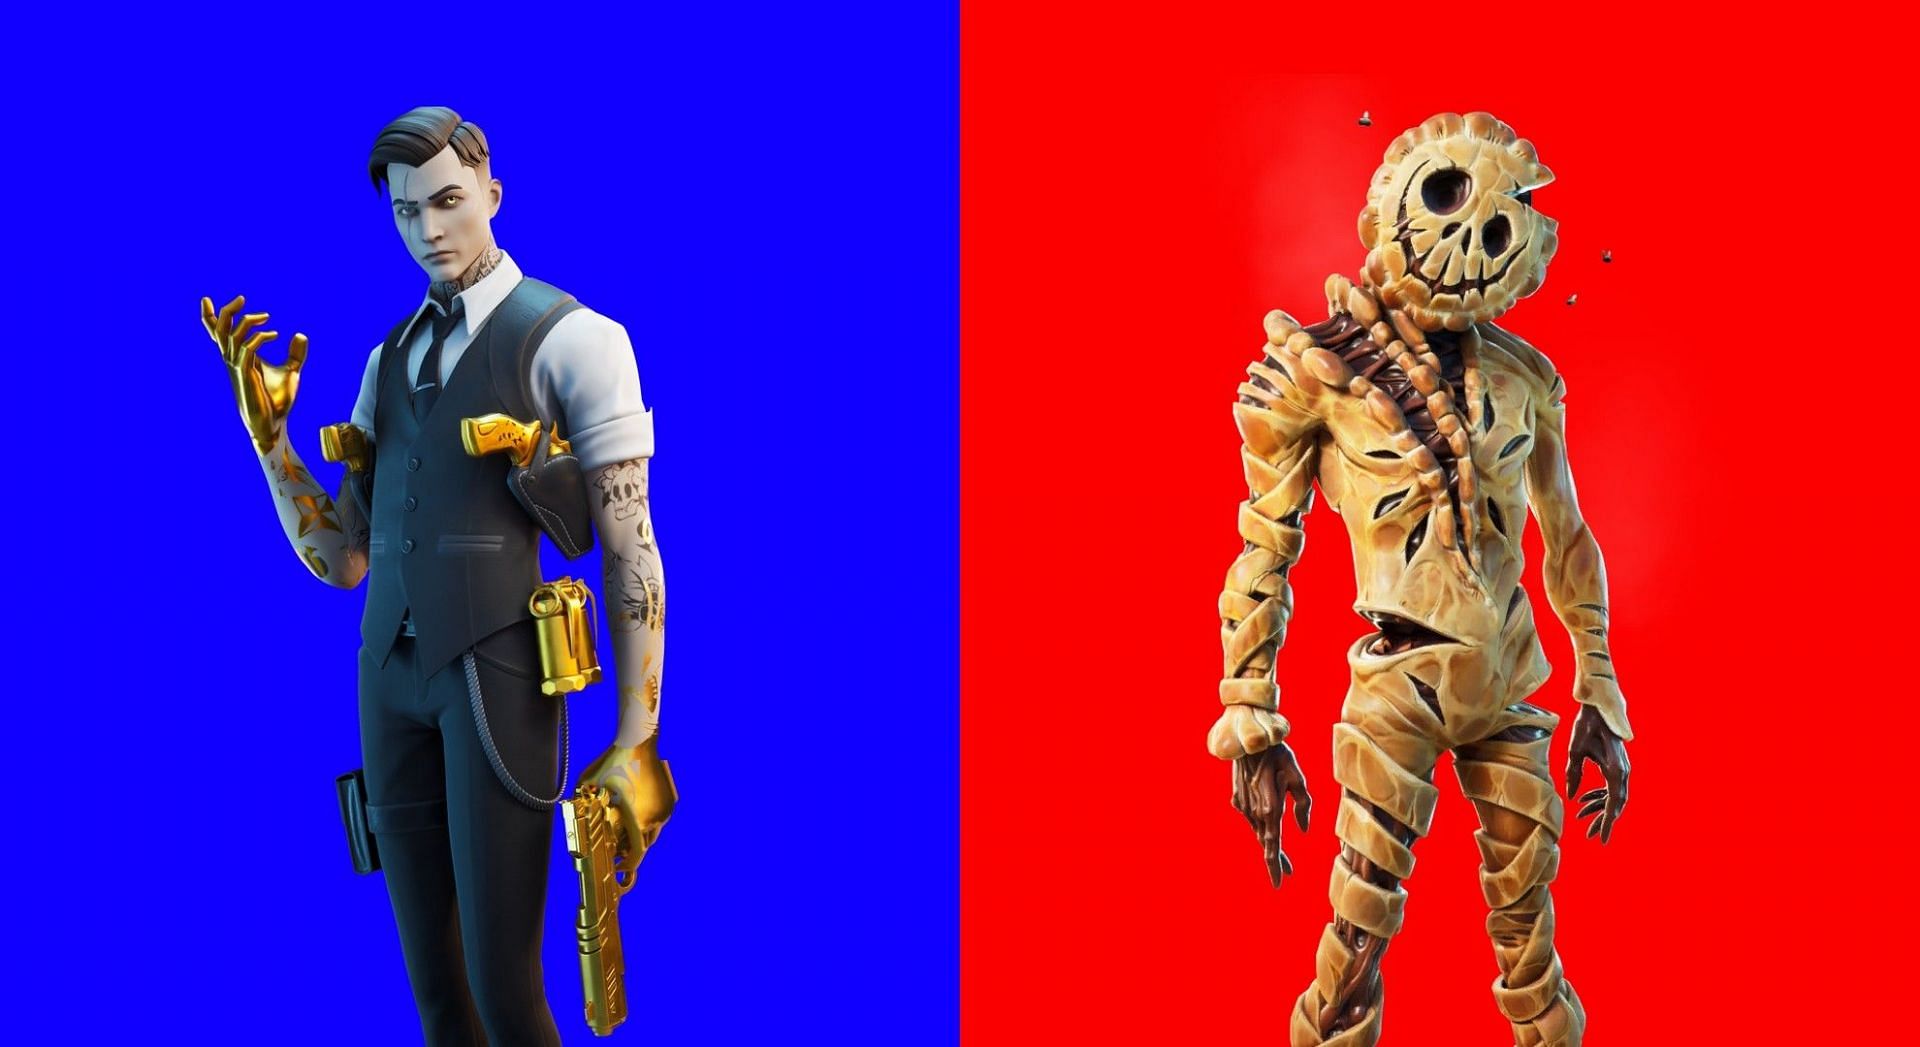 Many Fortnite skins qualify as some of the best and worst designs in the game&#039;s history (Image via Sportskeeda)